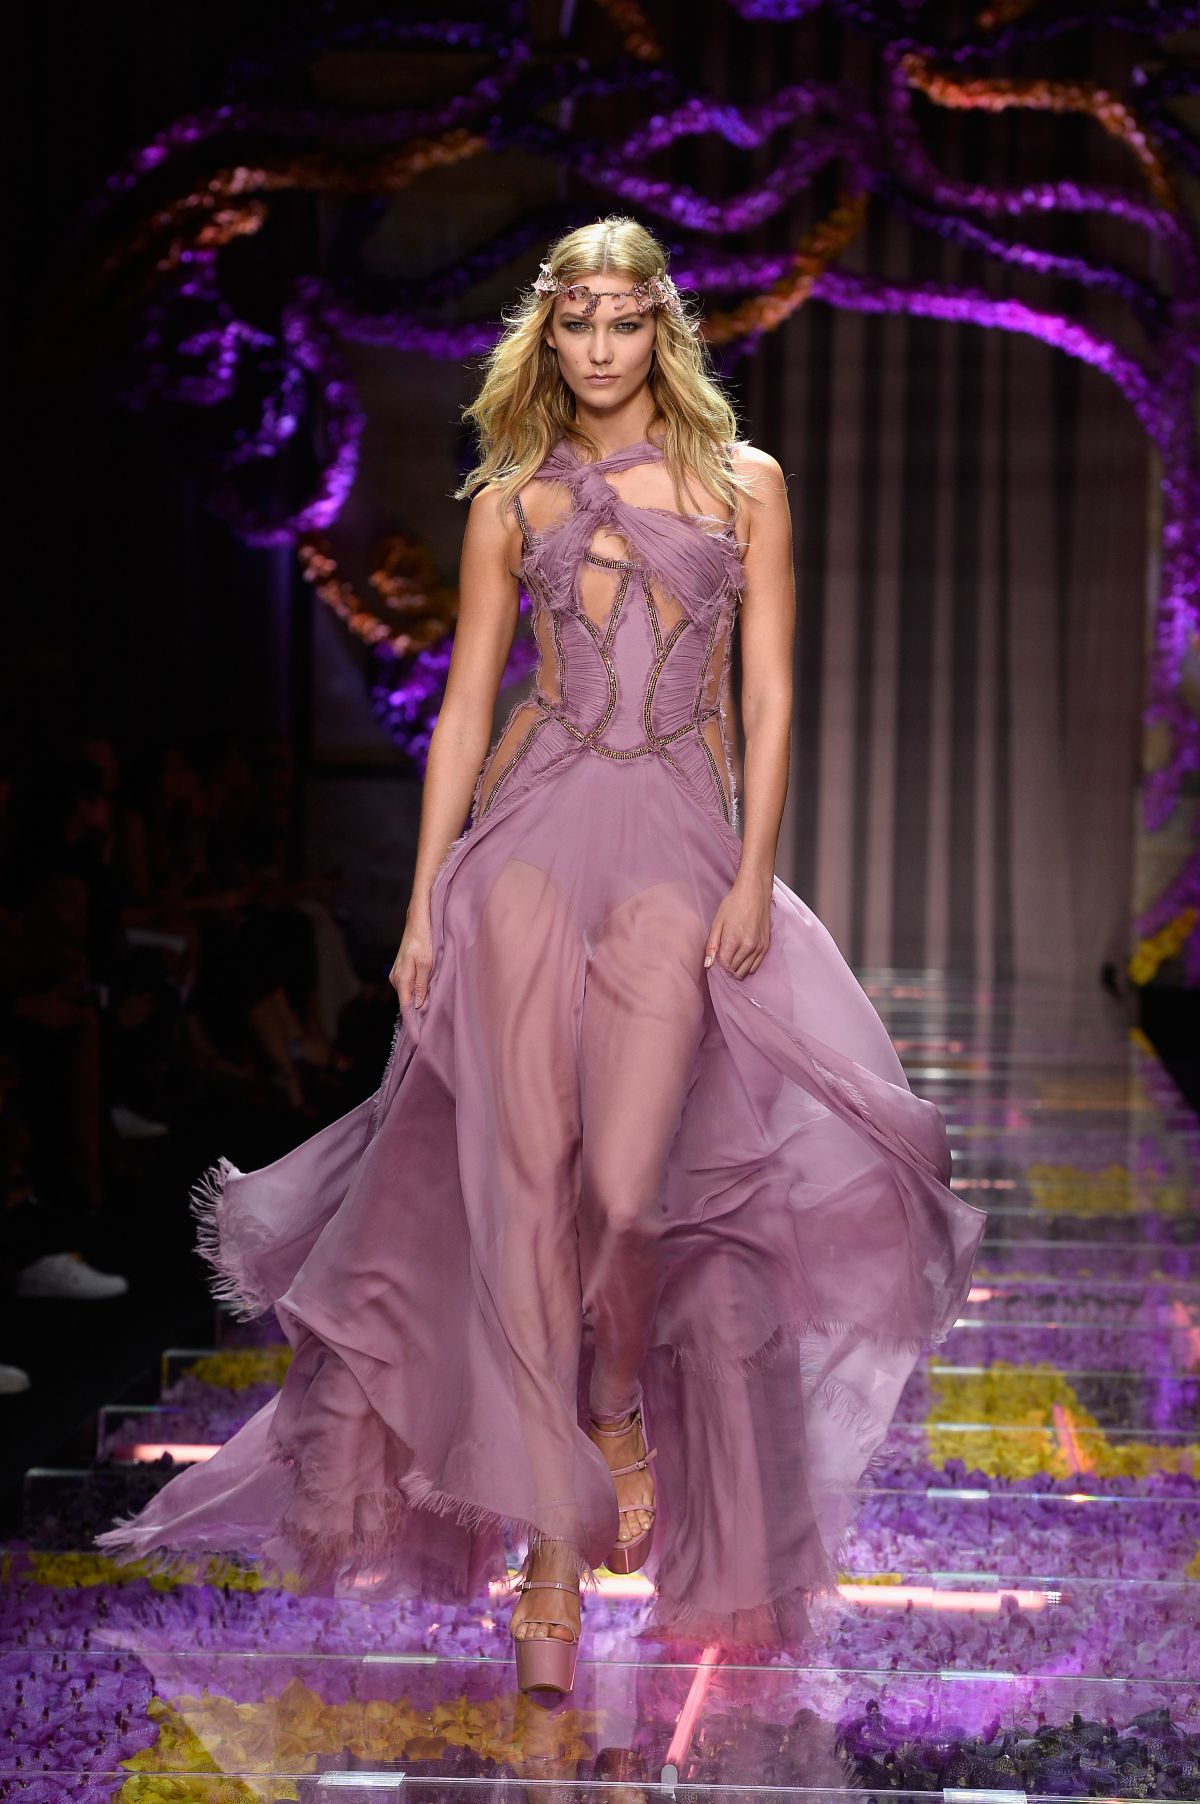 KARLIE KLOSS on the Runway of Atelier Versace Fashion Show in Paris – HawtCelebs1200 x 1804